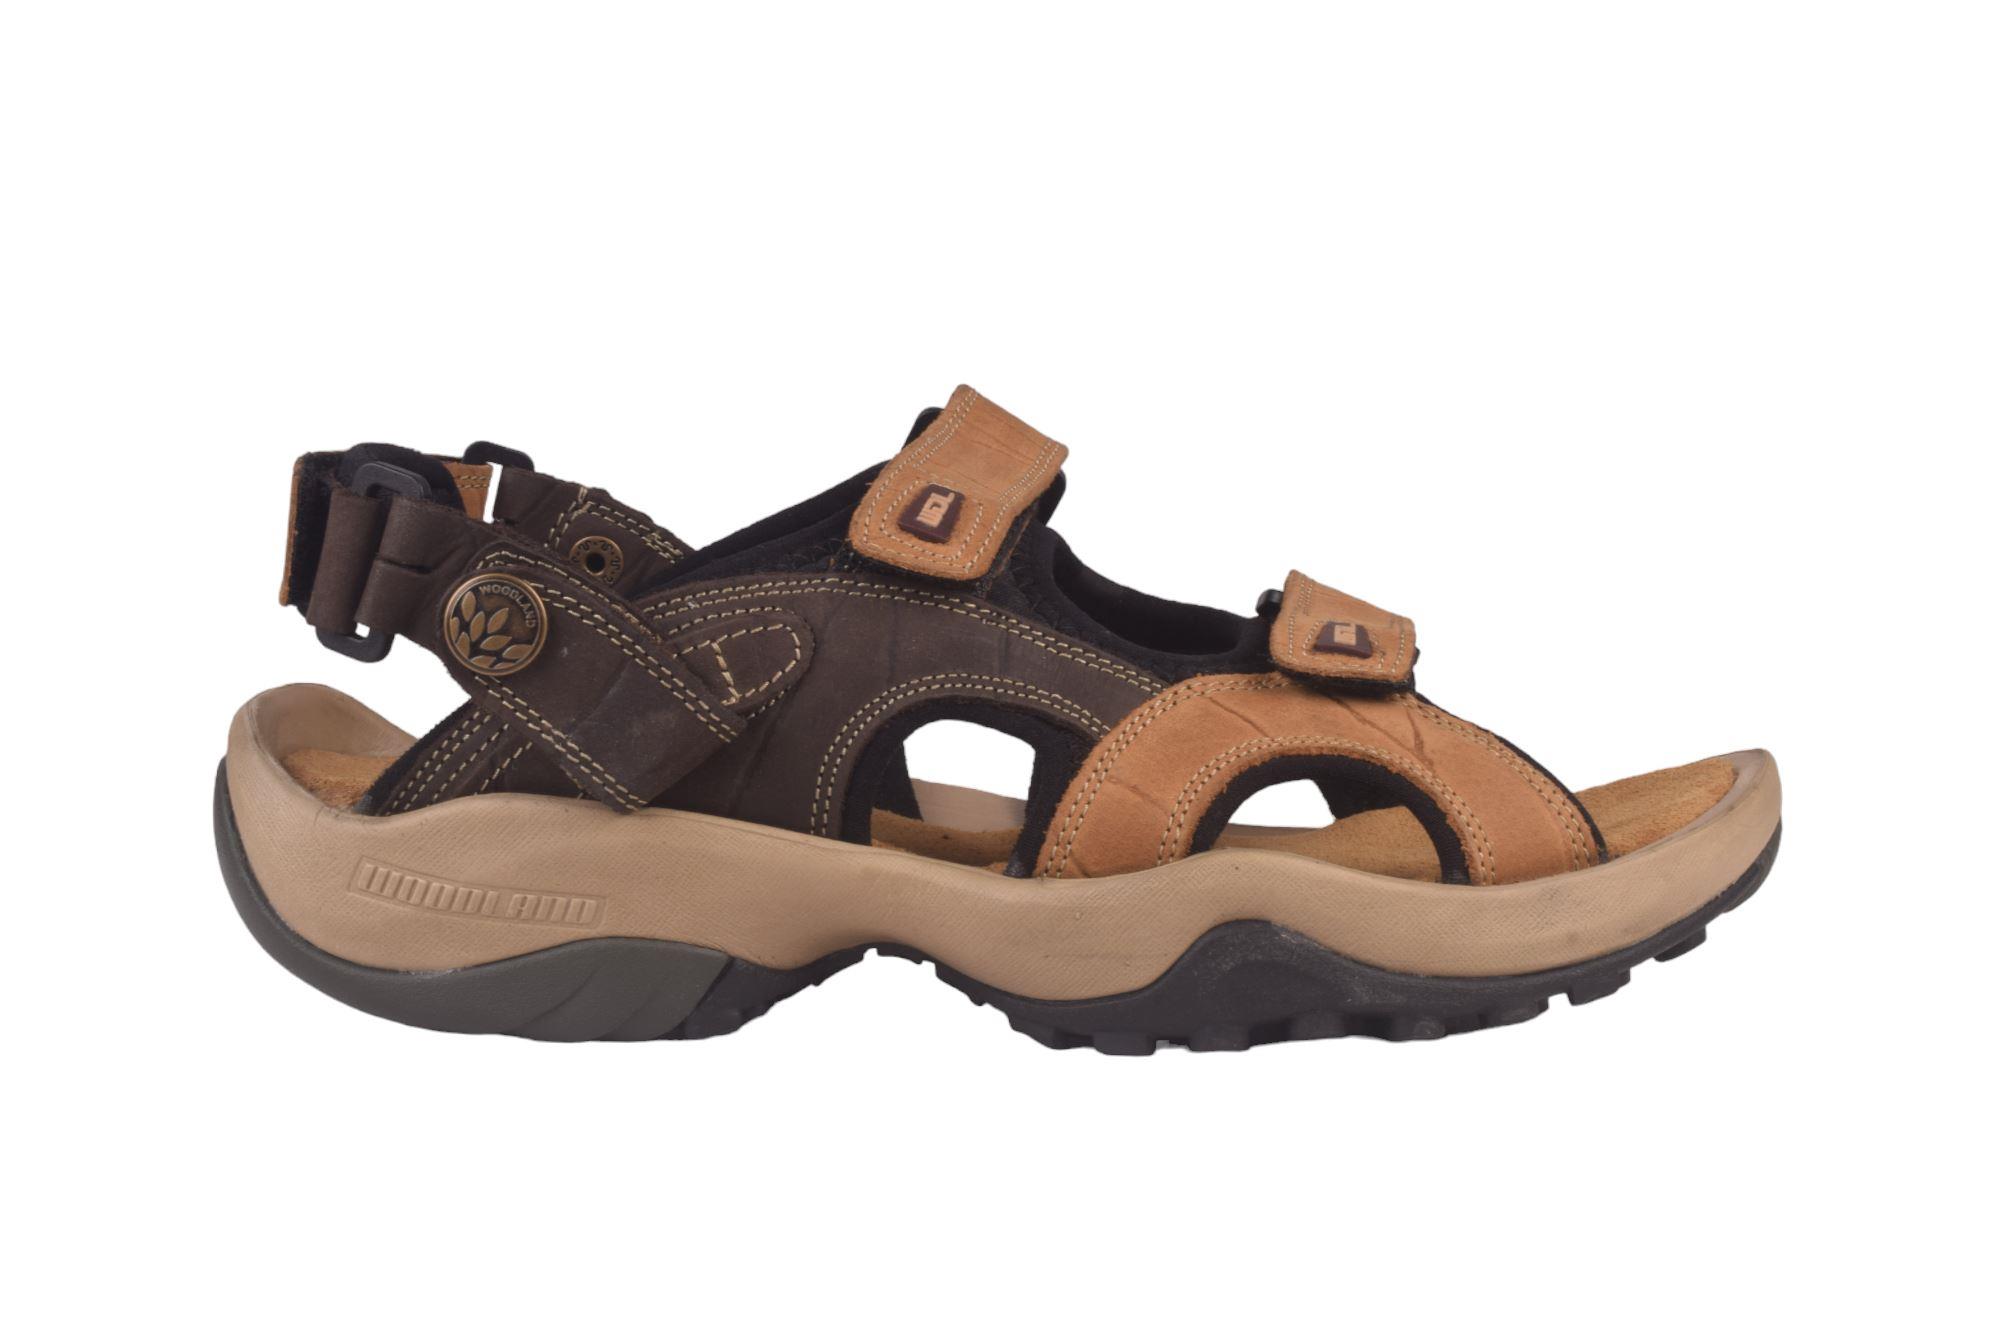 Buy woodland sandals for man size 11 in India @ Limeroad